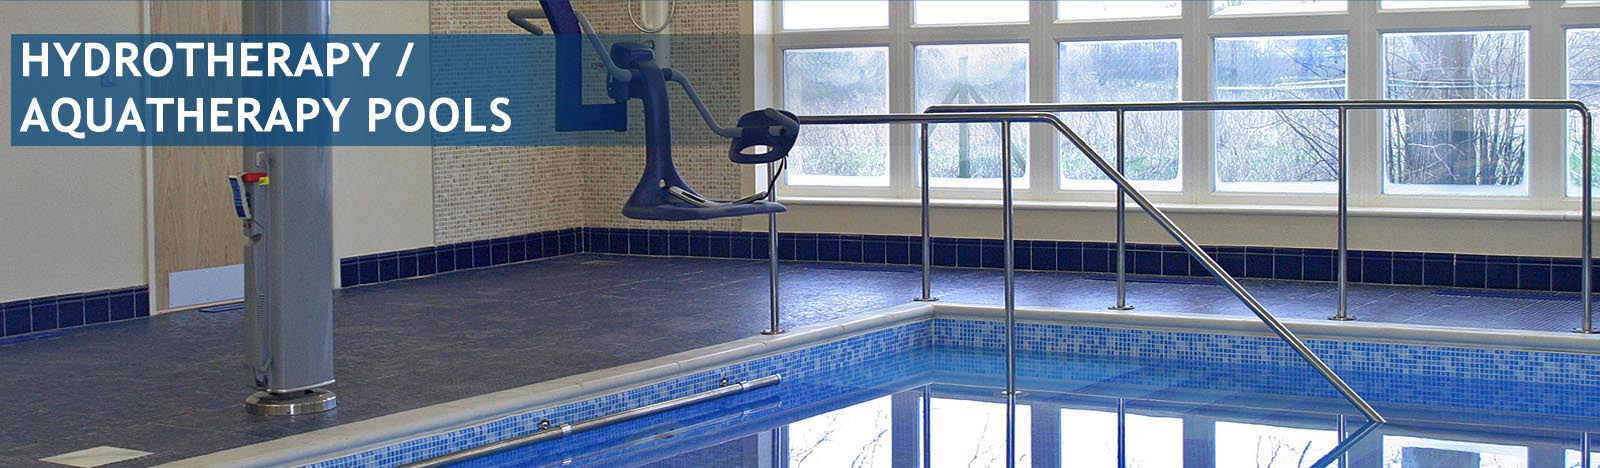 hydrotherapy pools installers london